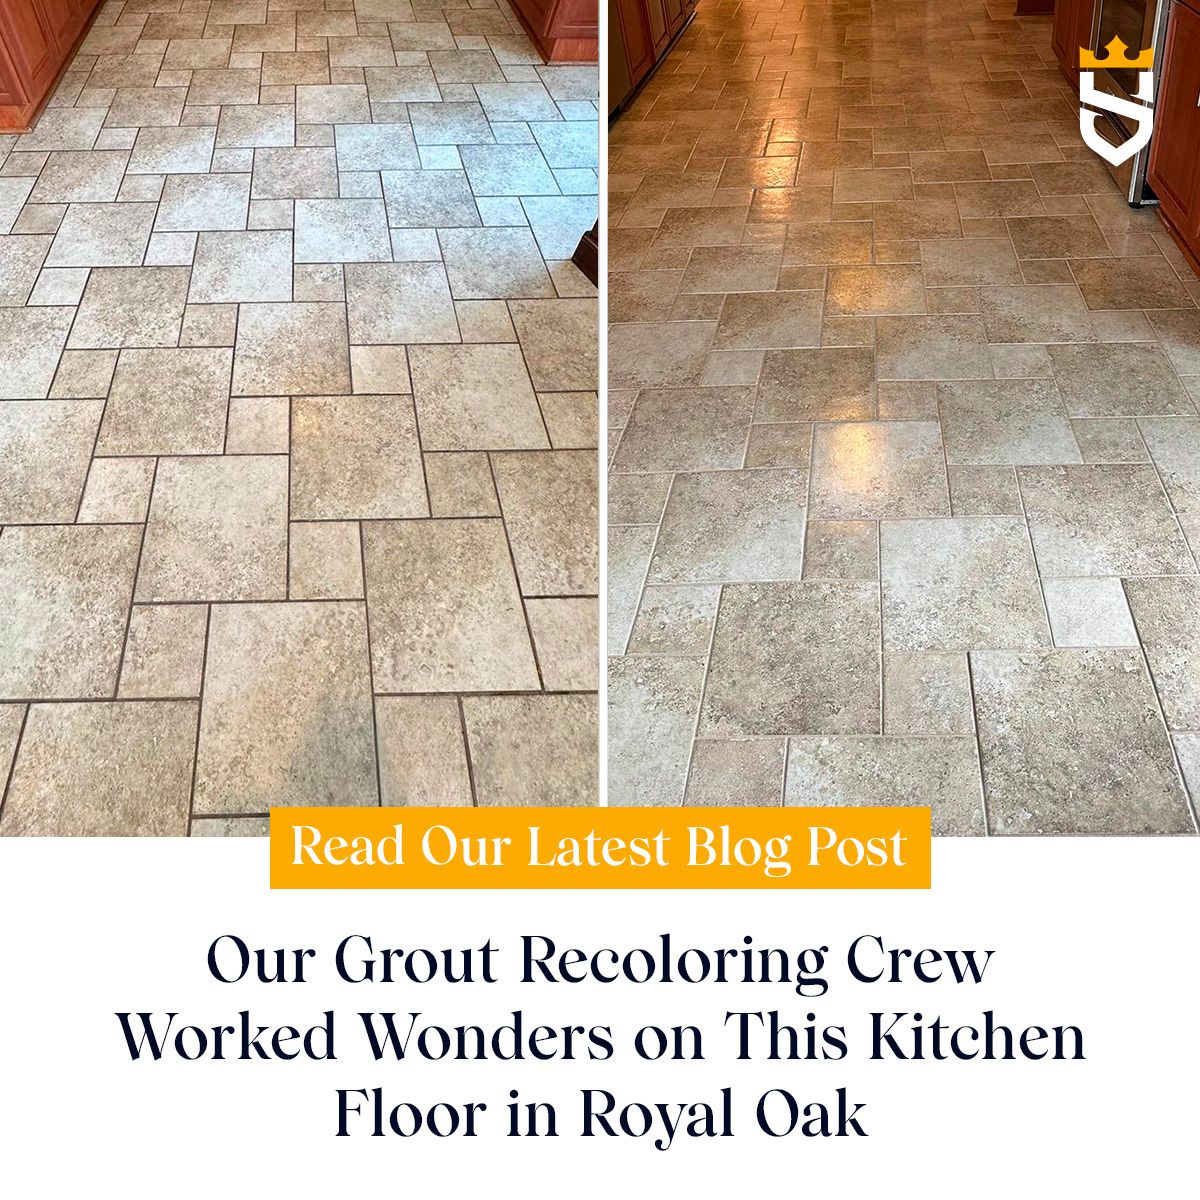 Our Grout Recoloring Crew Worked Wonders on This Kitchen Floor in Royal Oak